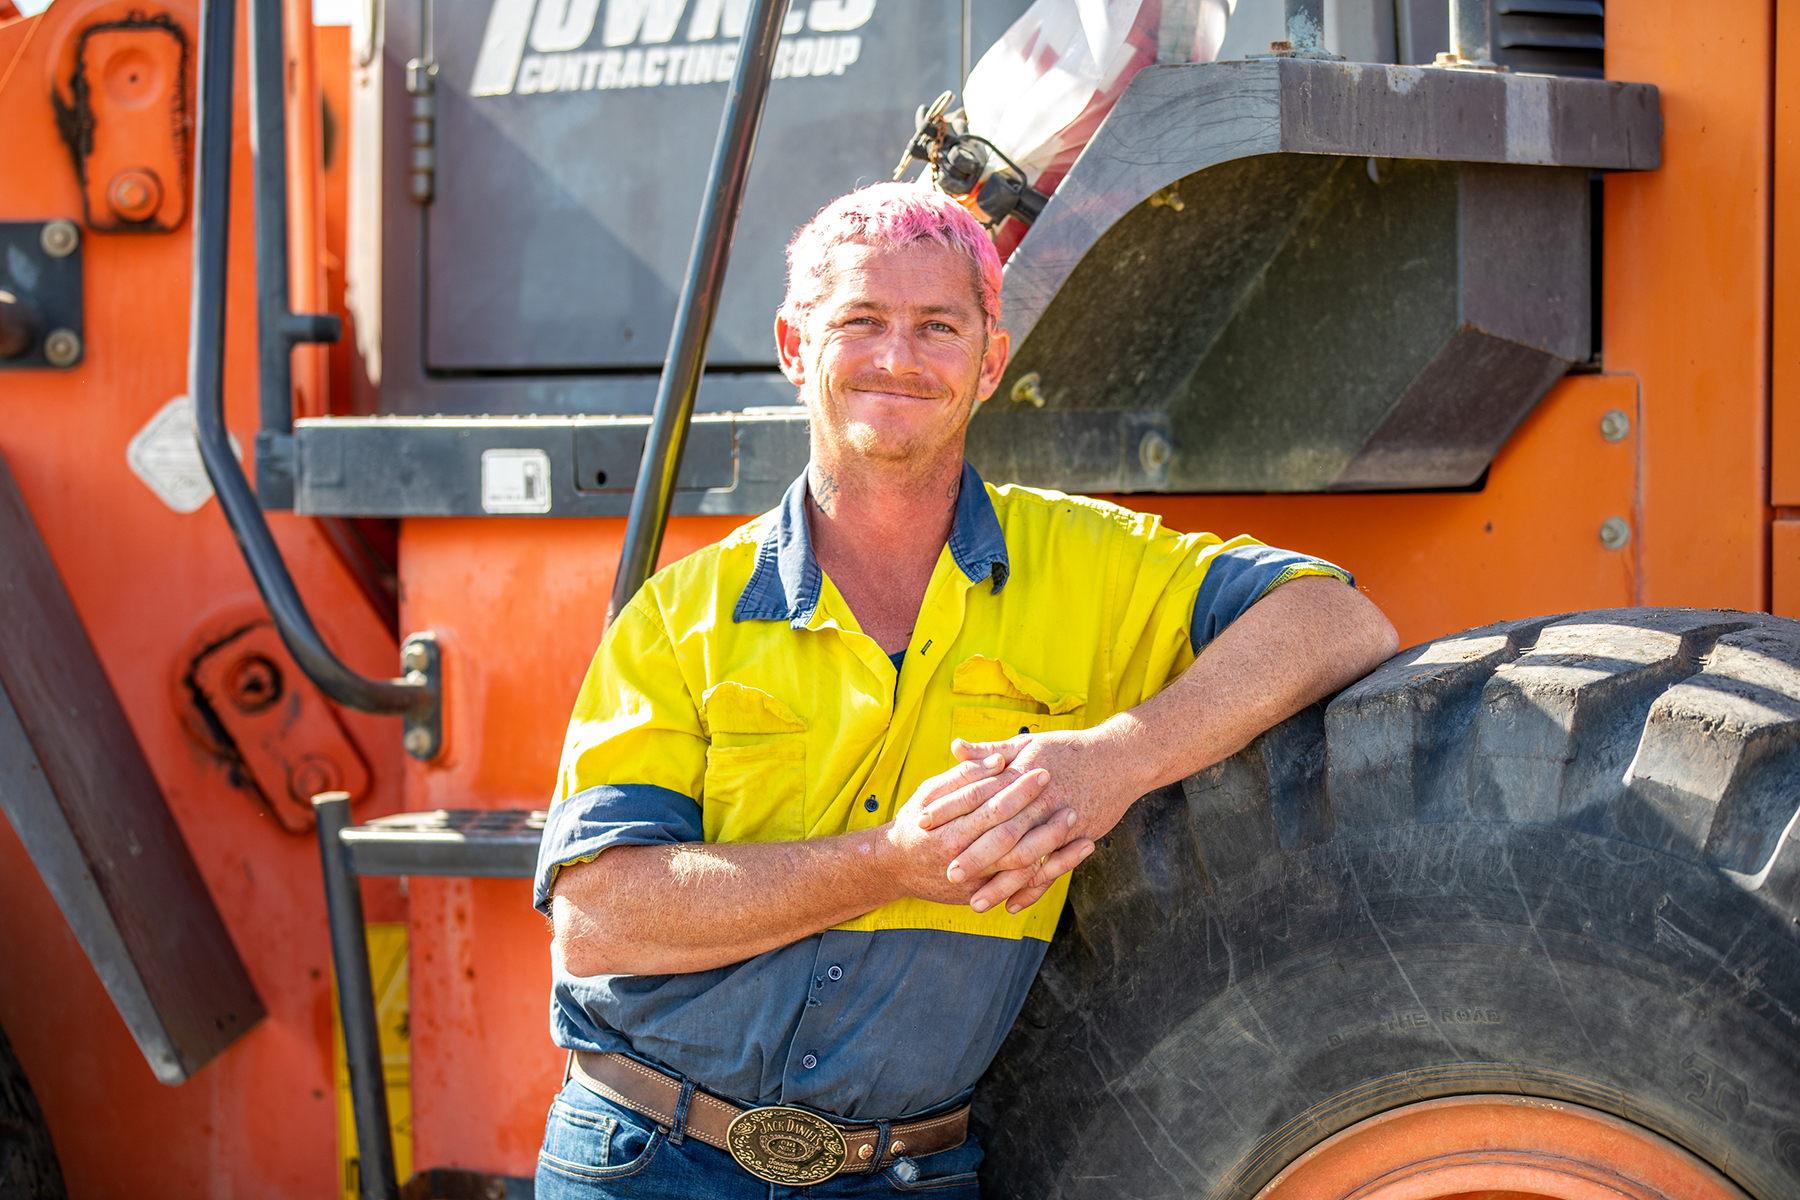 Local civil works subcontractor standing with machinery used to build Inland Rail